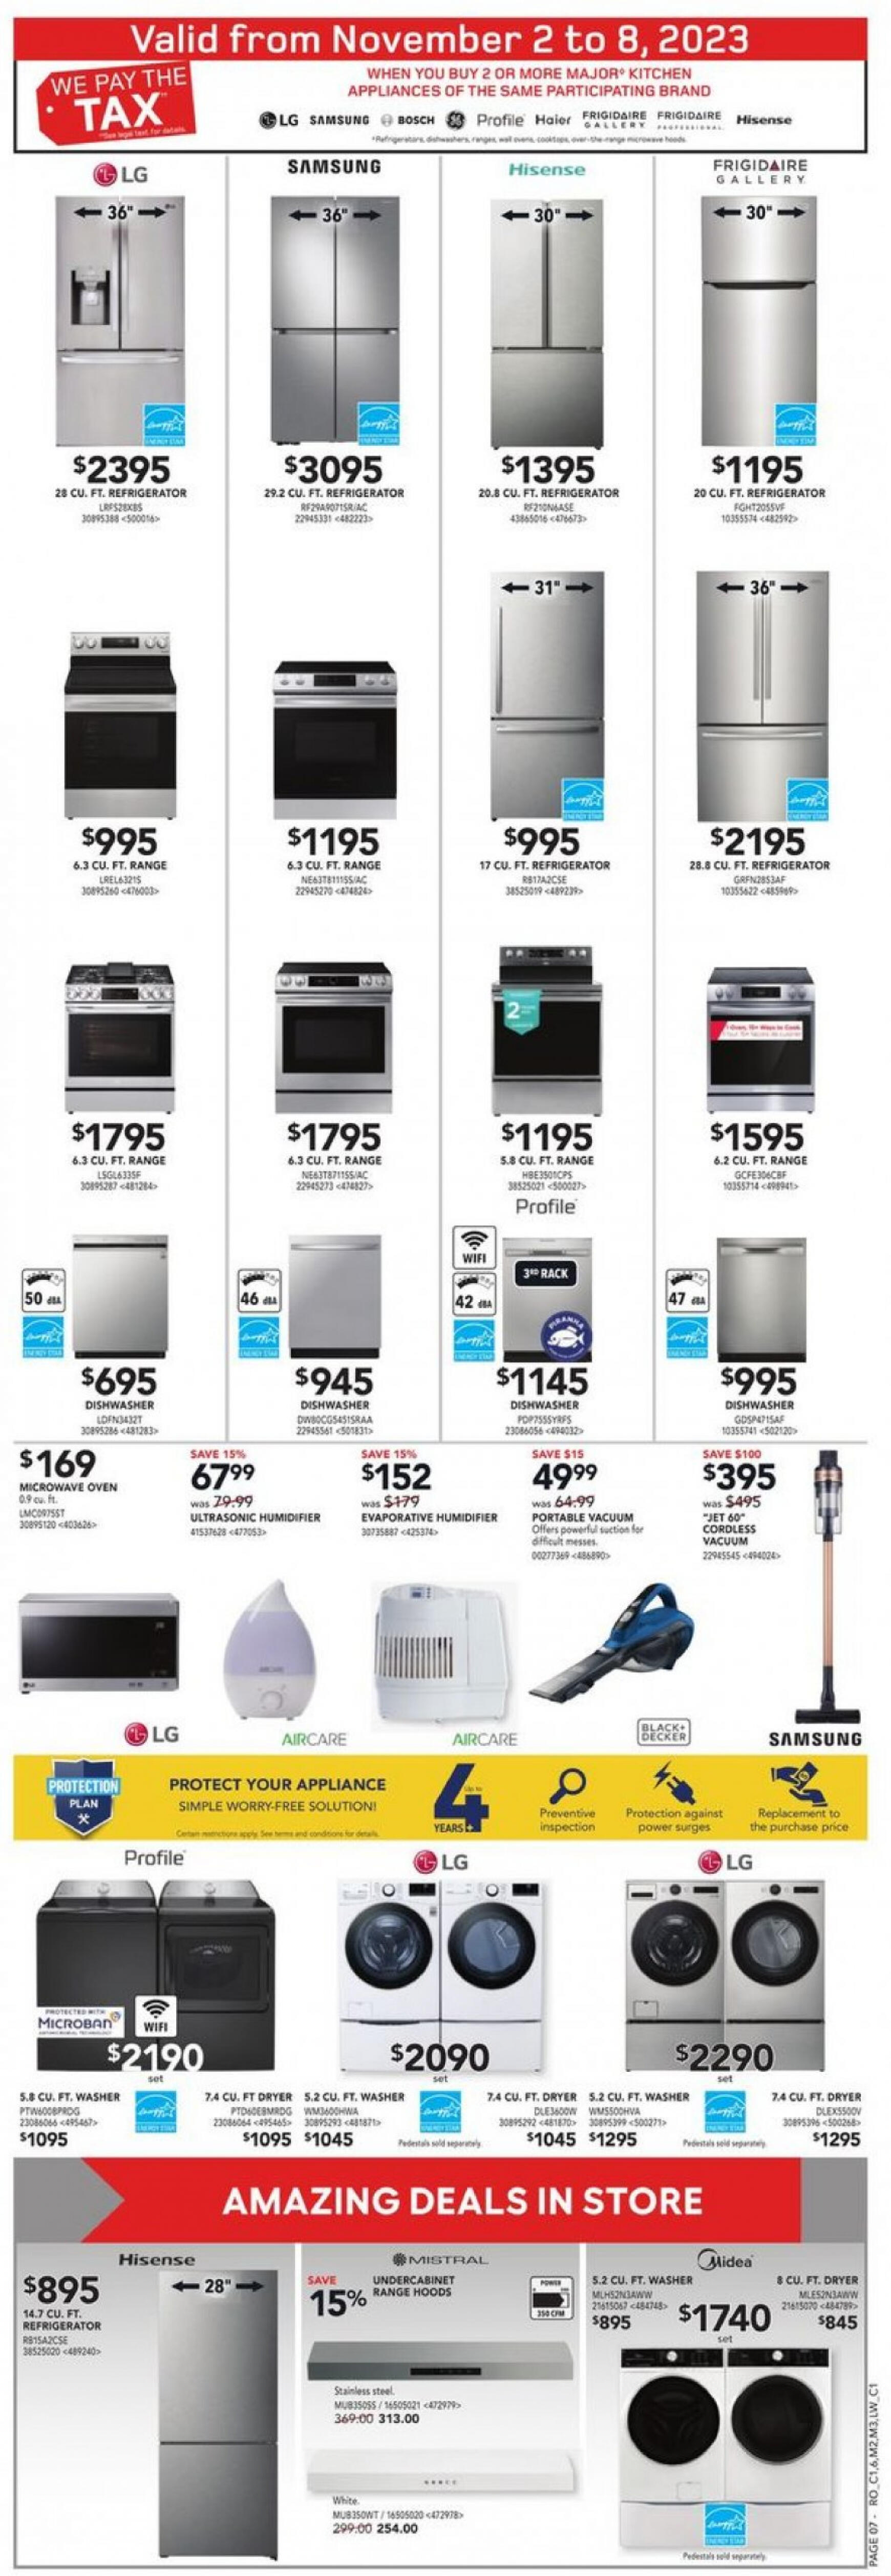 lowes - Lowe's - page: 10